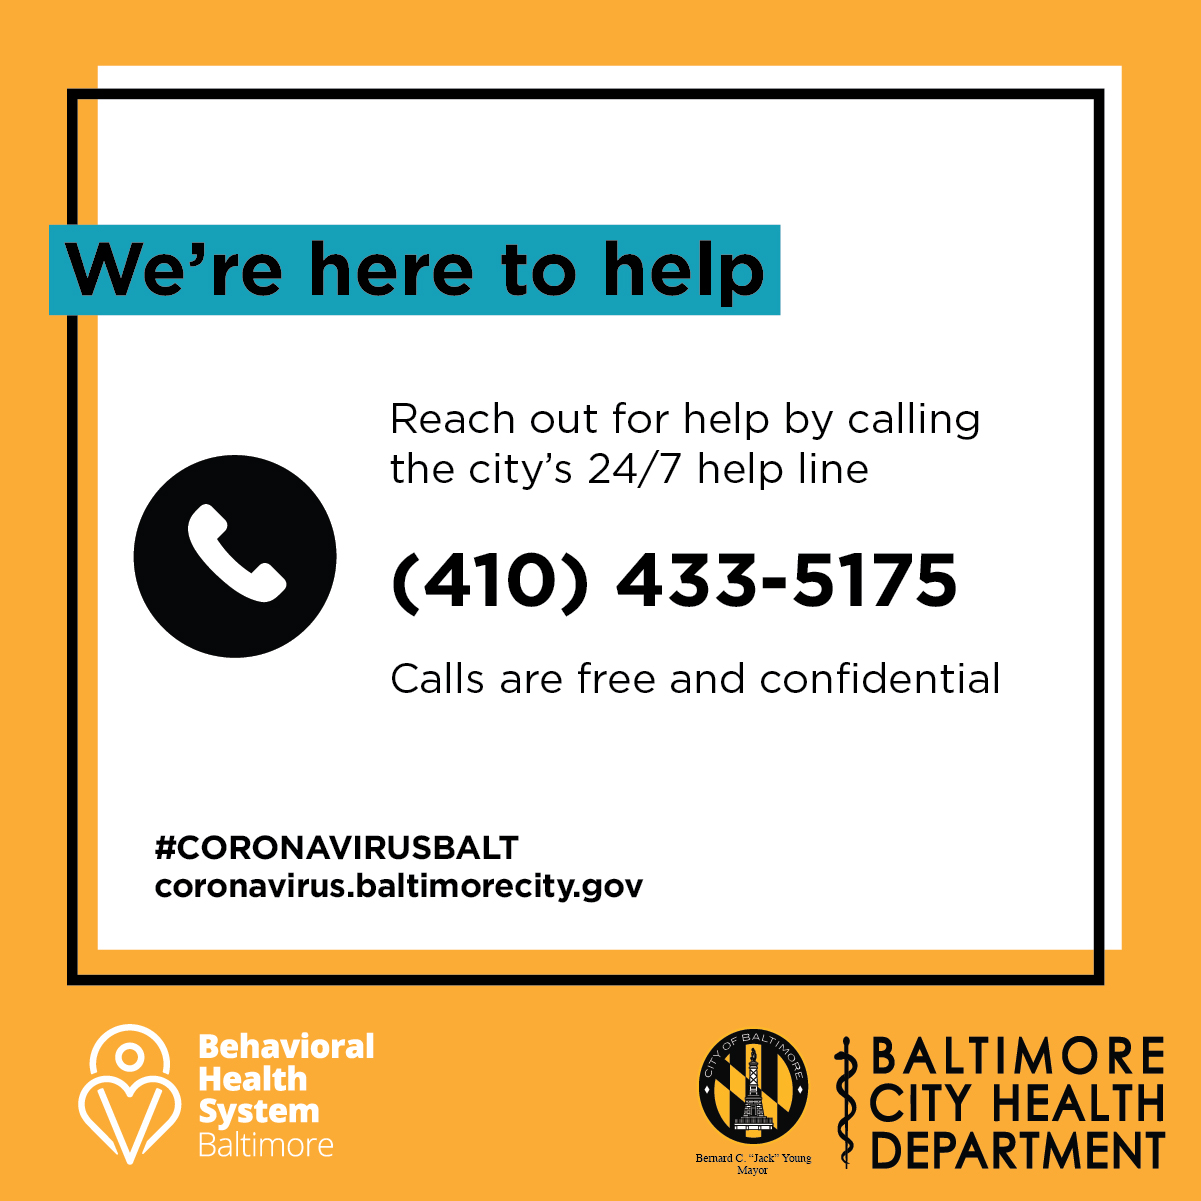 We're here to help. Call 410-433-5175